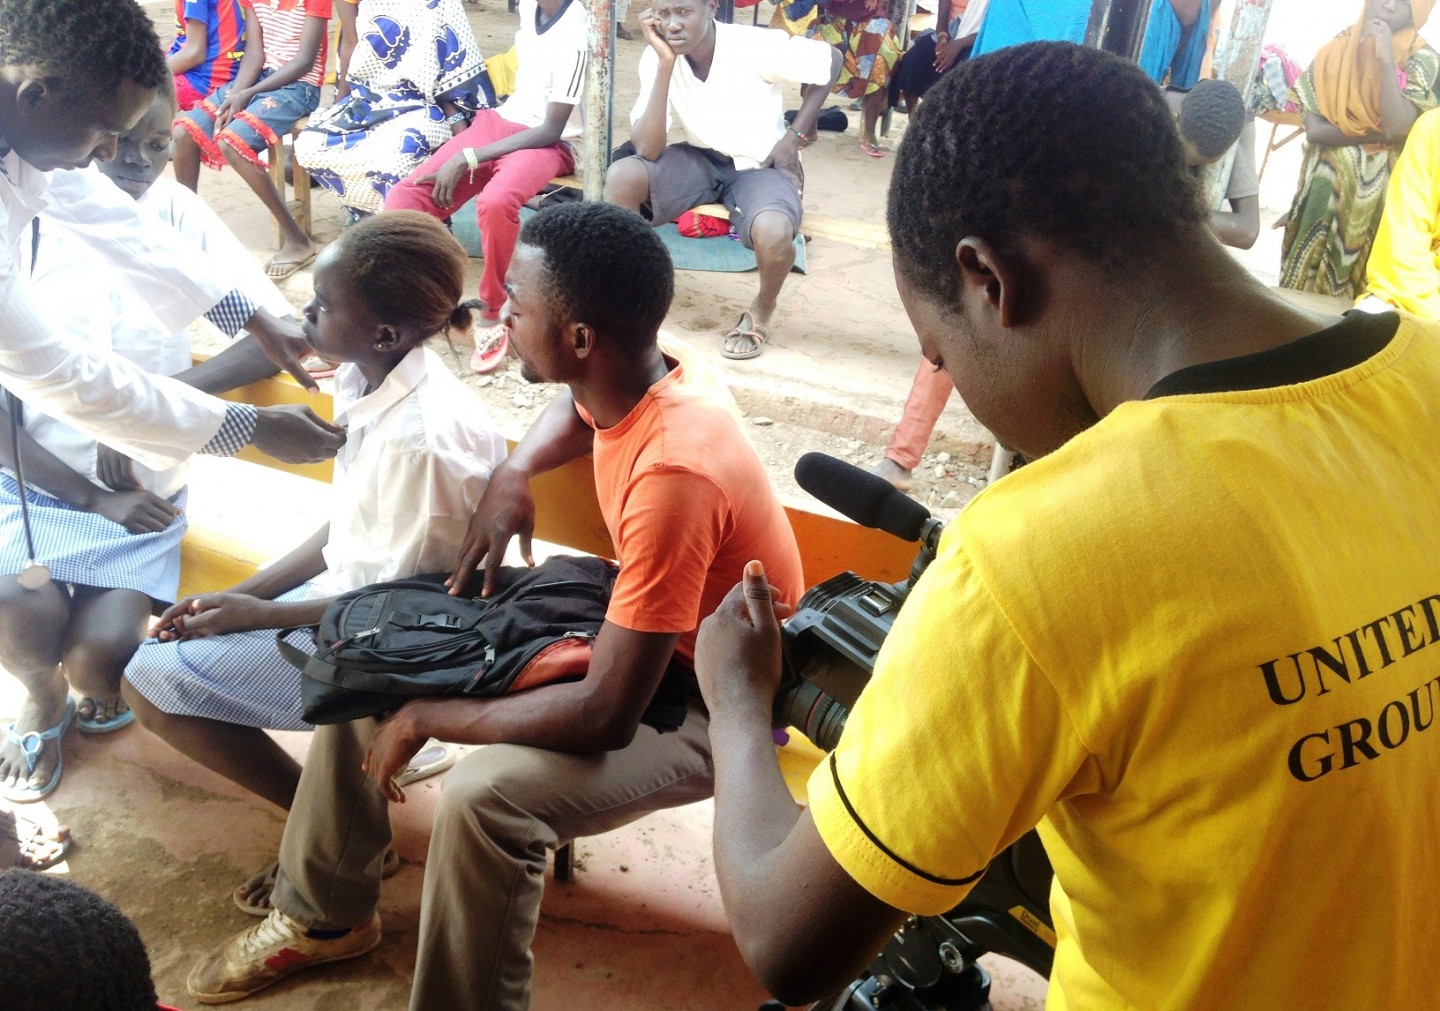 Amos (in orange shirt) with his group members on the set of the United Drama for Peace movie.